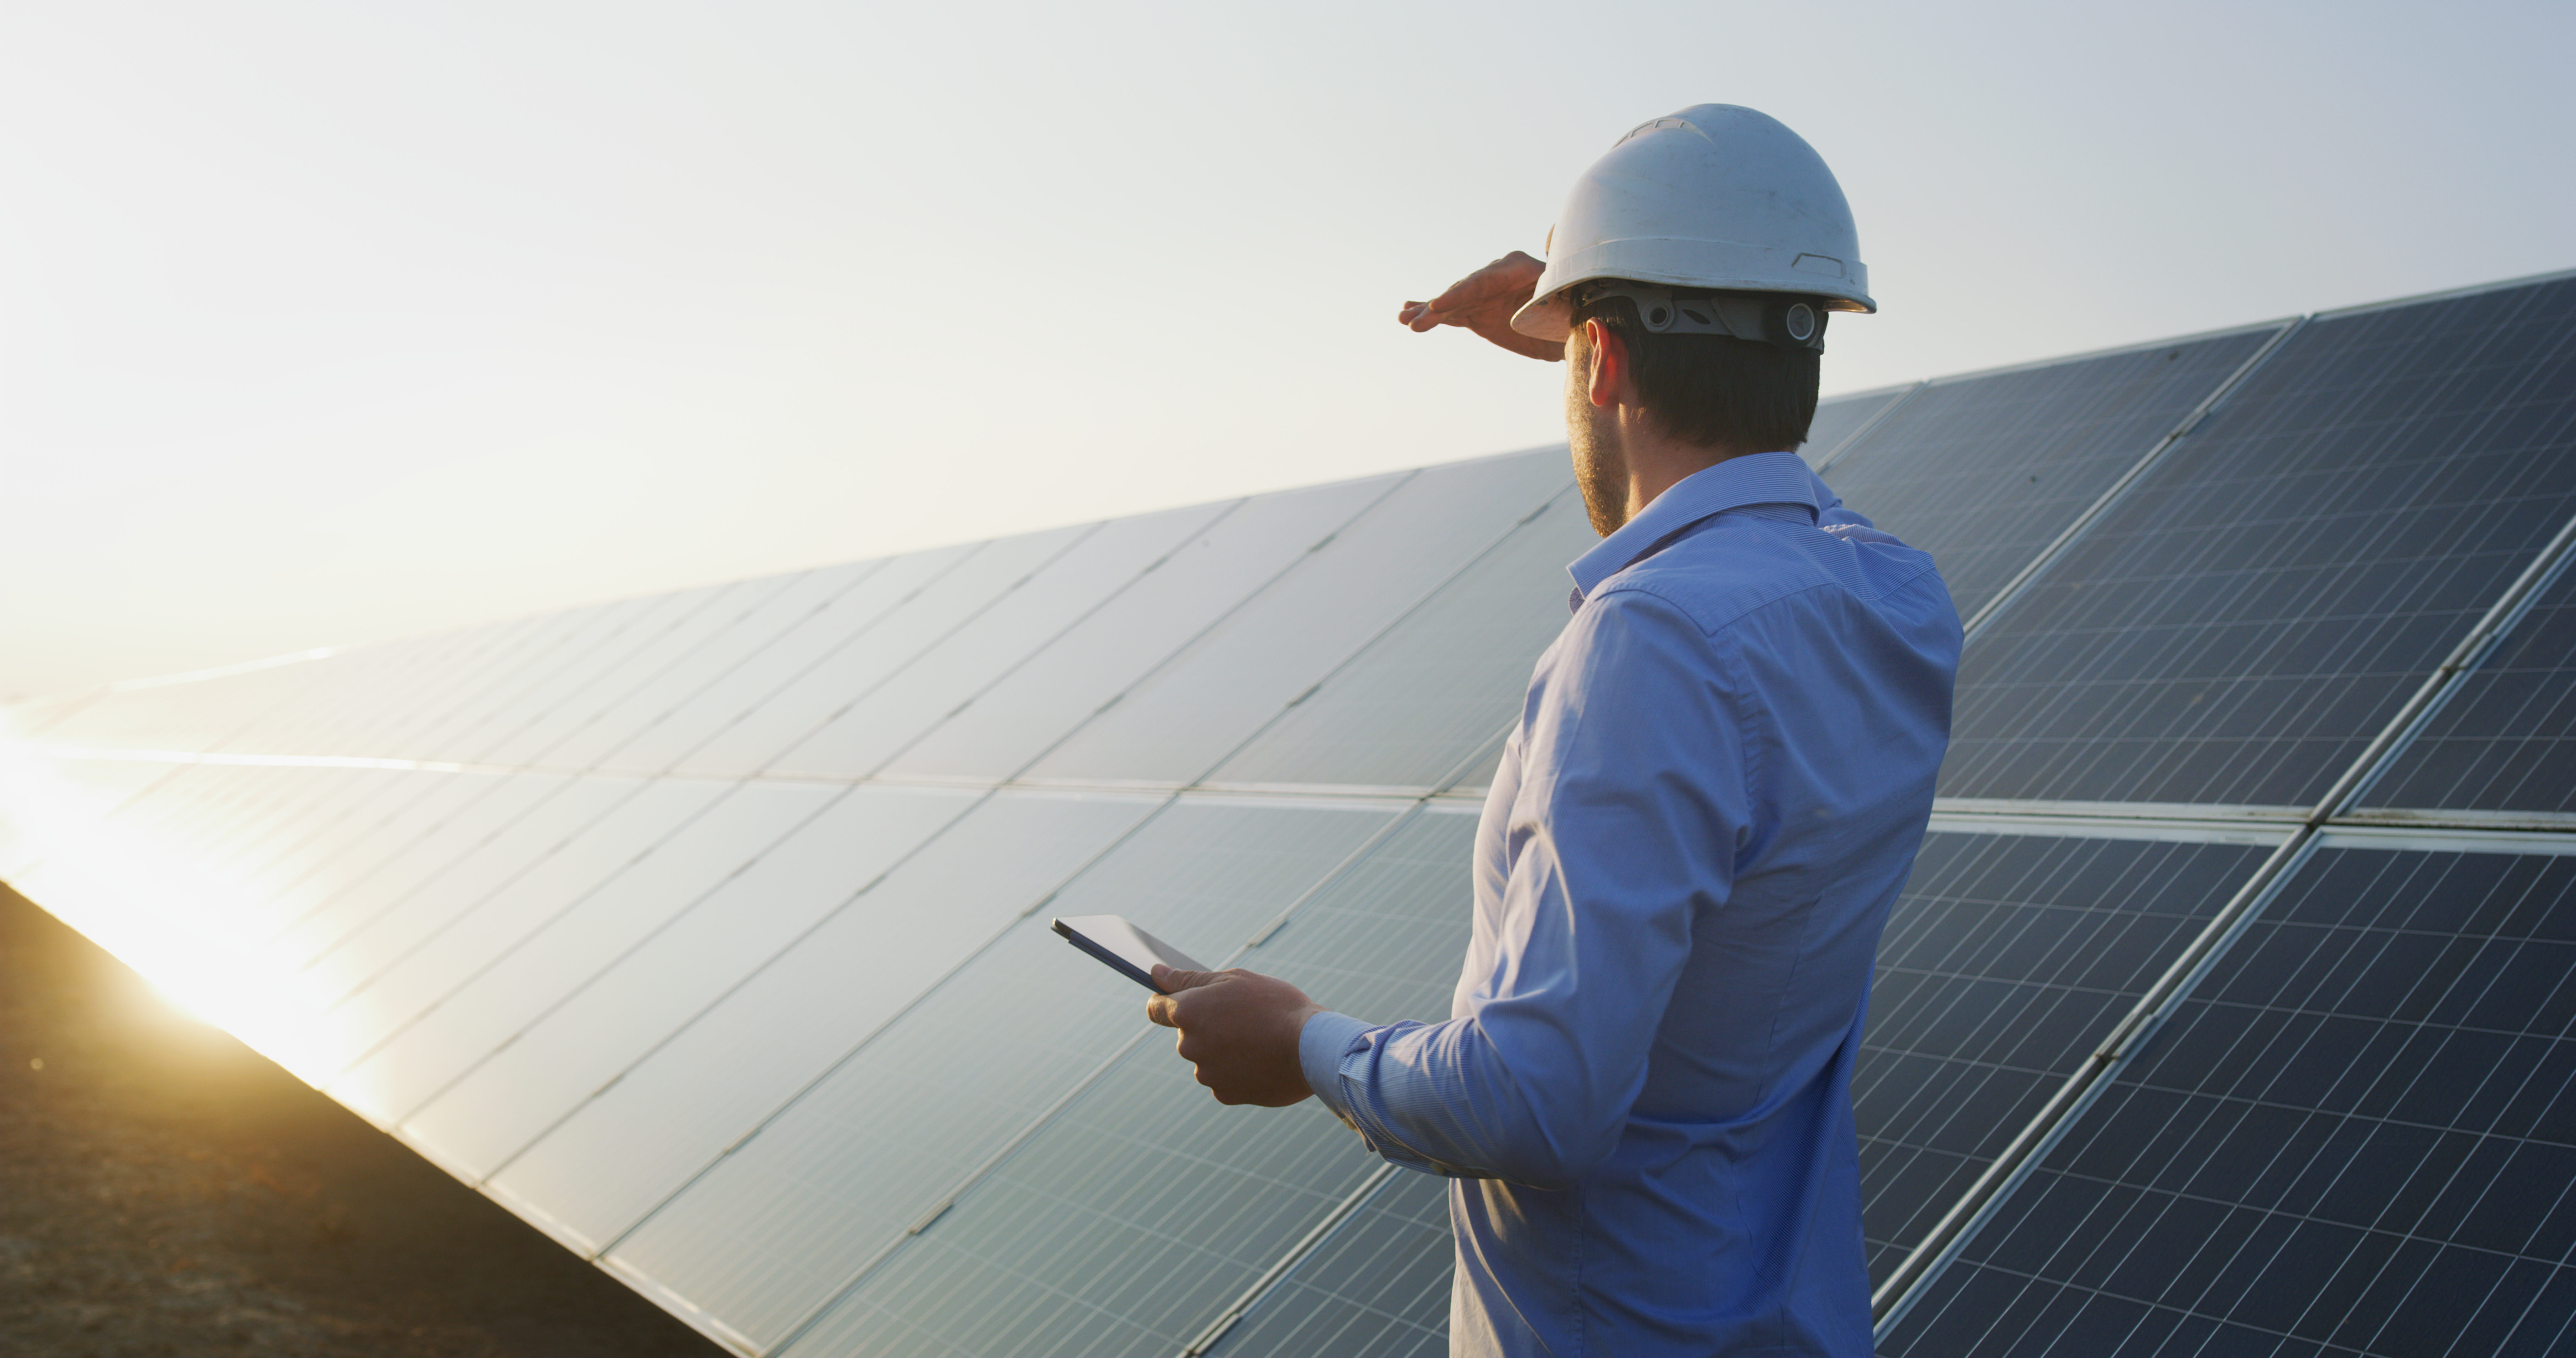 An engineer with a tablet and a hard hat, looking at a row of solar panels.